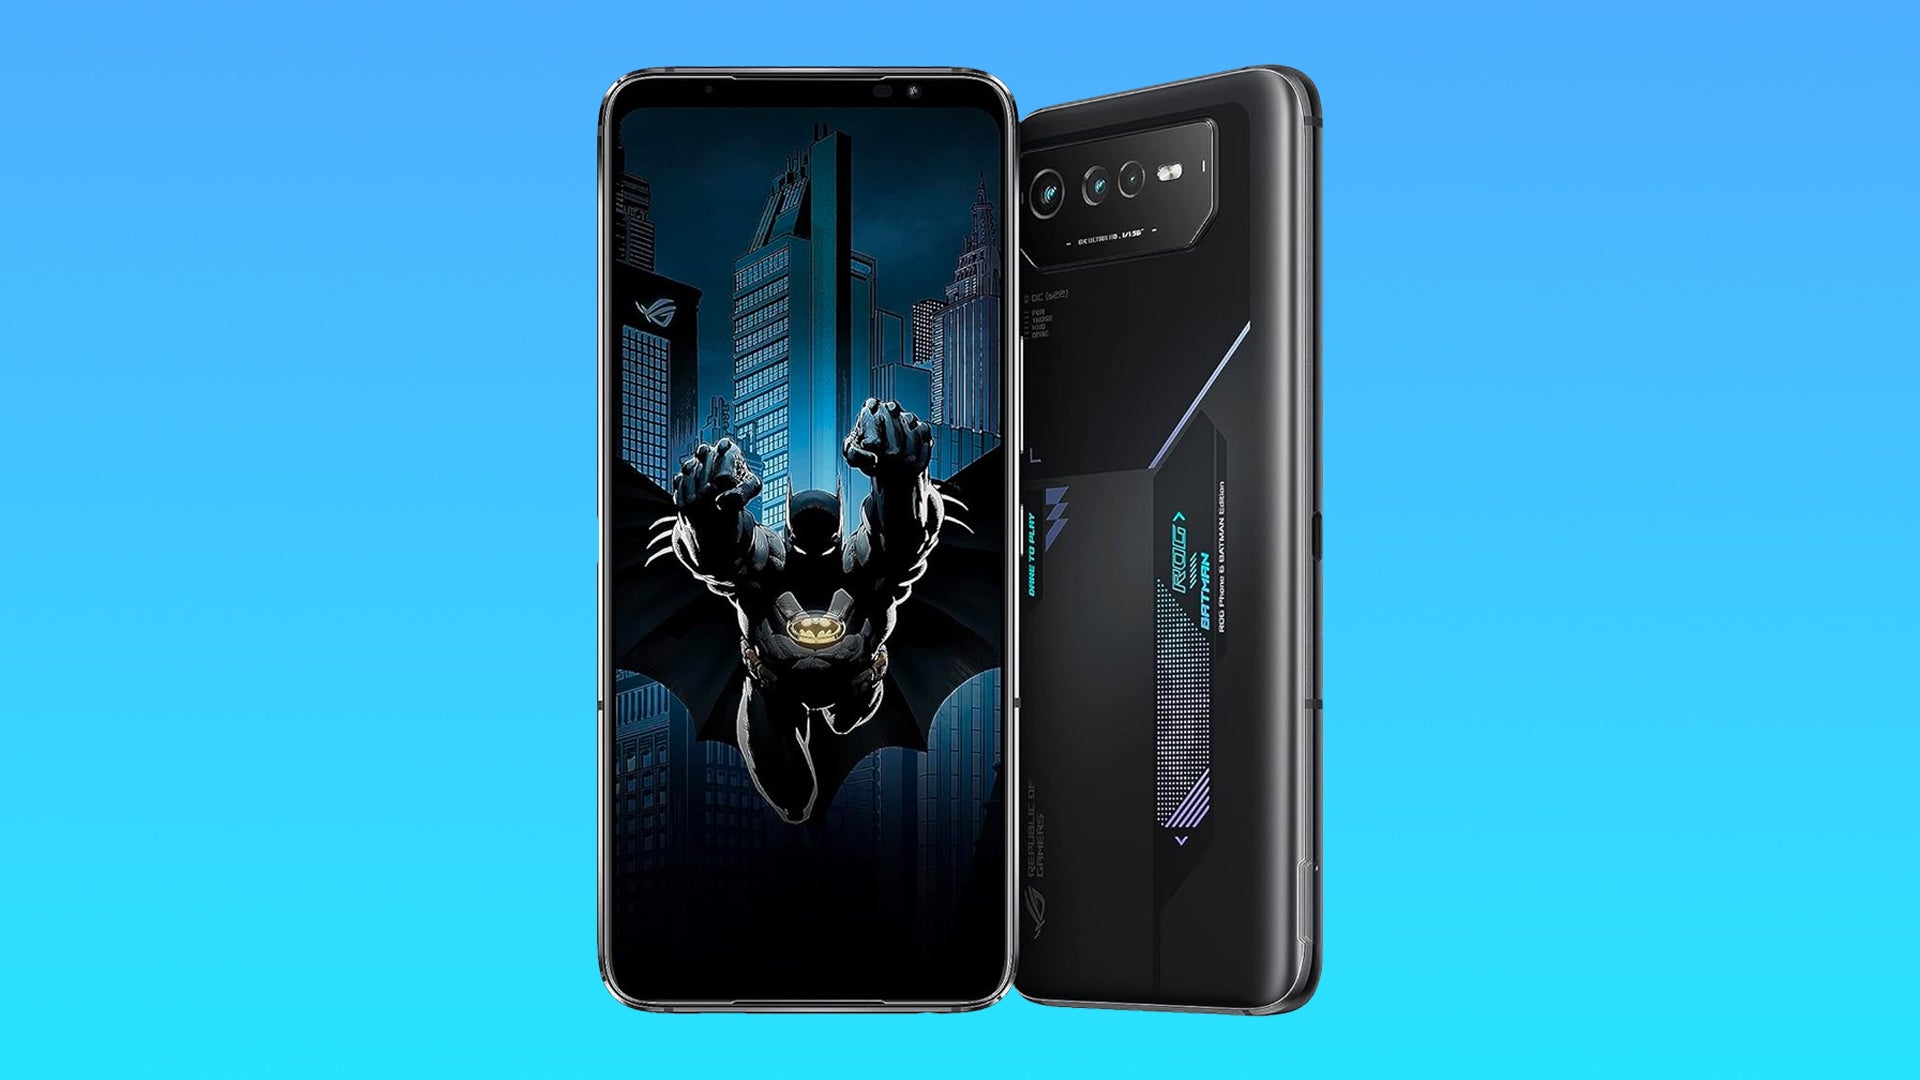 This Asus ROG Phone 6 Batman Edition is available for just £550